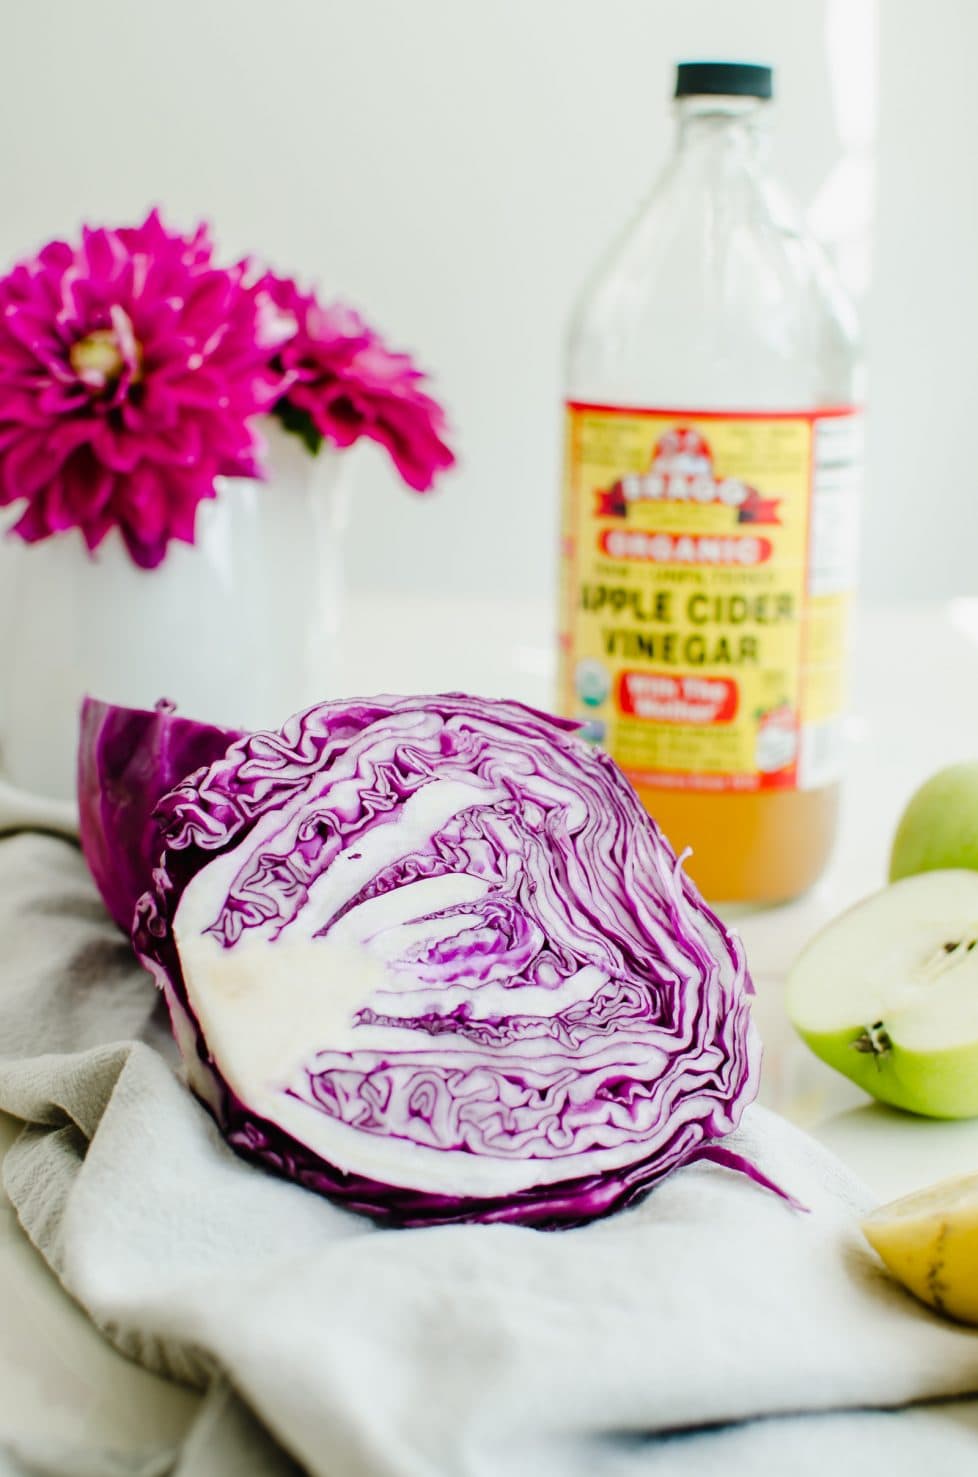 A red cabbage half with a green apple half on the side with a bottle of cider vinegar in the background.